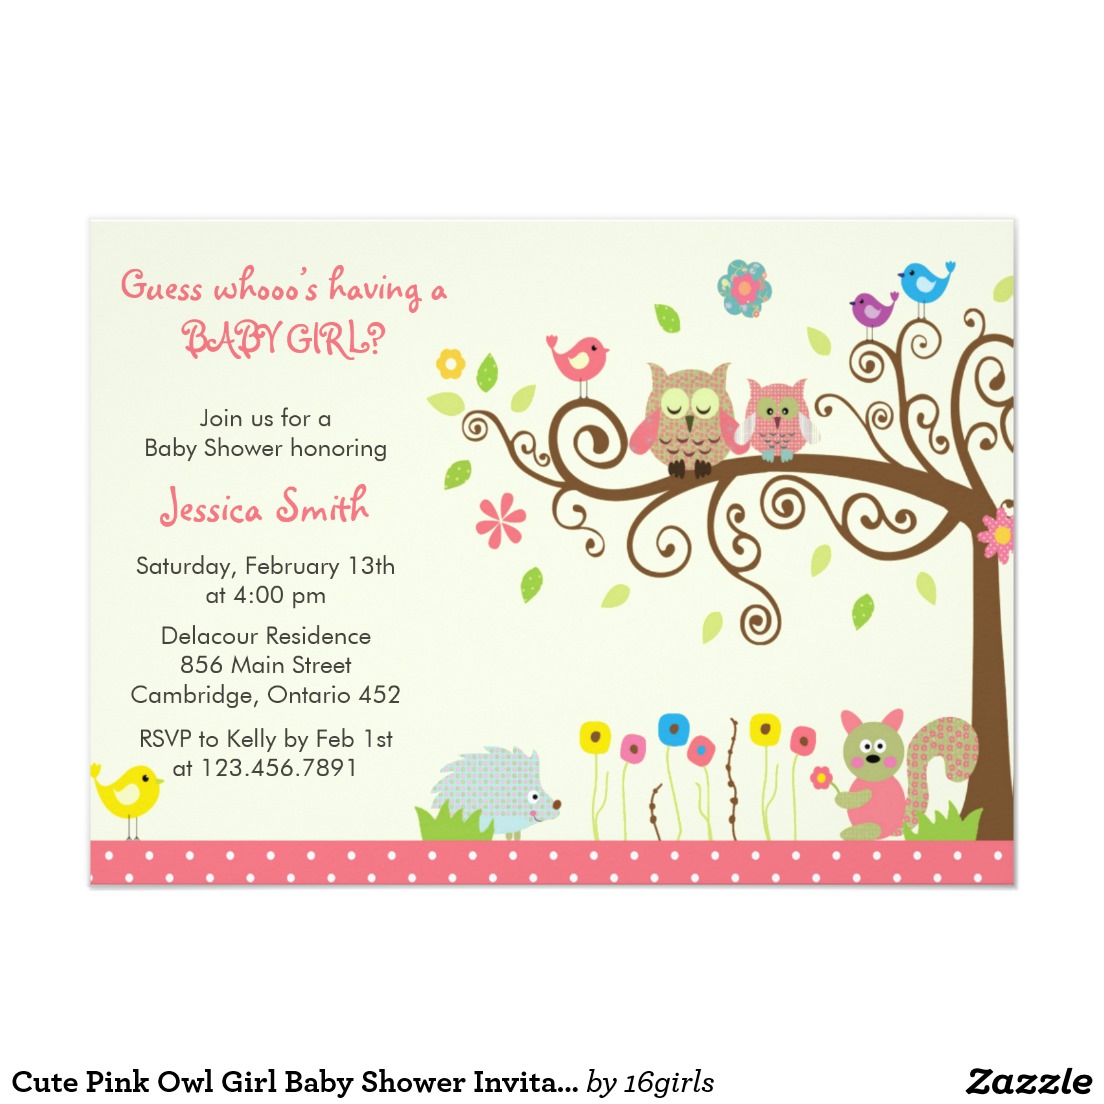 Full Size of Baby Shower:63+ Delightful Cheap Baby Shower Invitations Image Inspirations Baby Shower Invitations Free Invitation Ideas Baby Shower Invitations